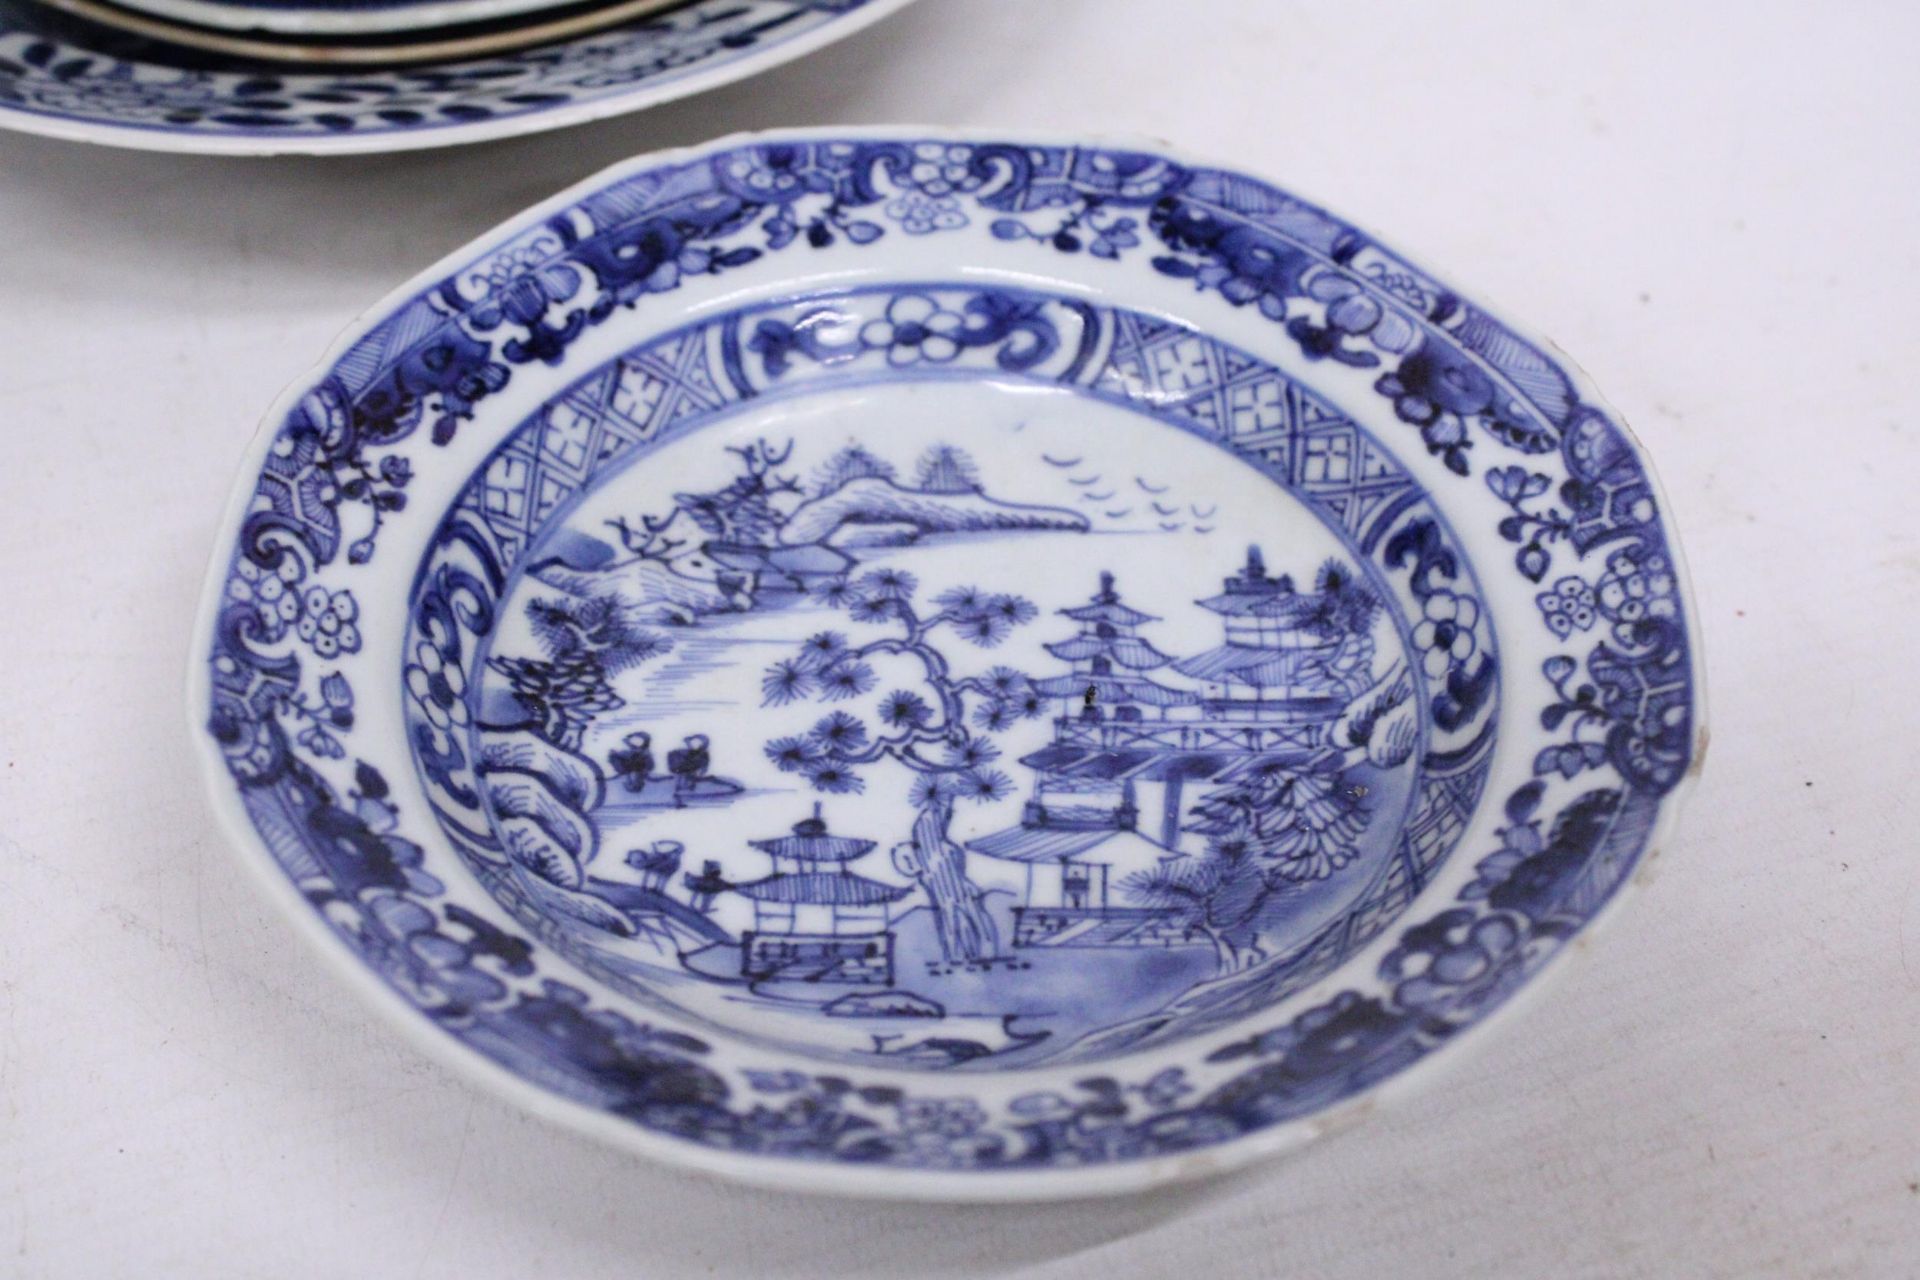 A COLLECTION OF CHINESE BLUE AND WHITE PORCELAIN TO INCLUDE A SMALL VASE, BOWL, PLATES, TEACUP ON - Image 3 of 5